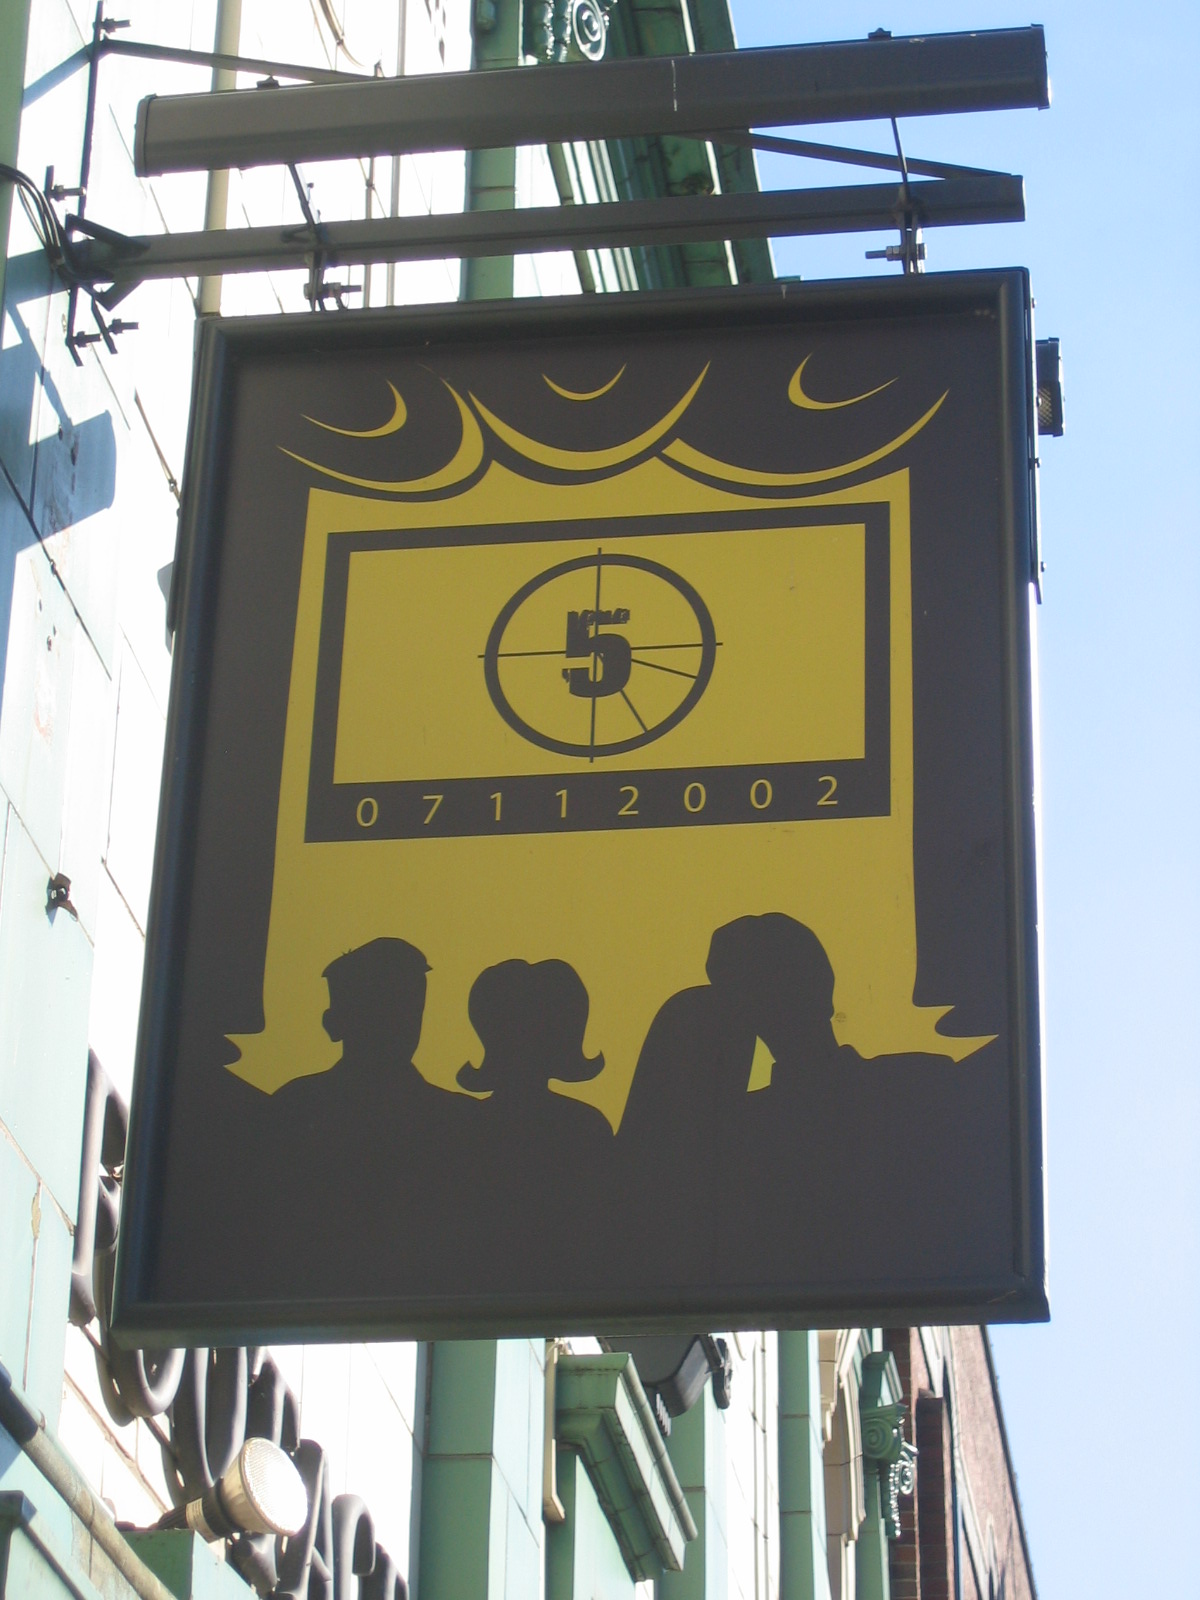 Photo taken by me – The Footage pub sign, Manchester 